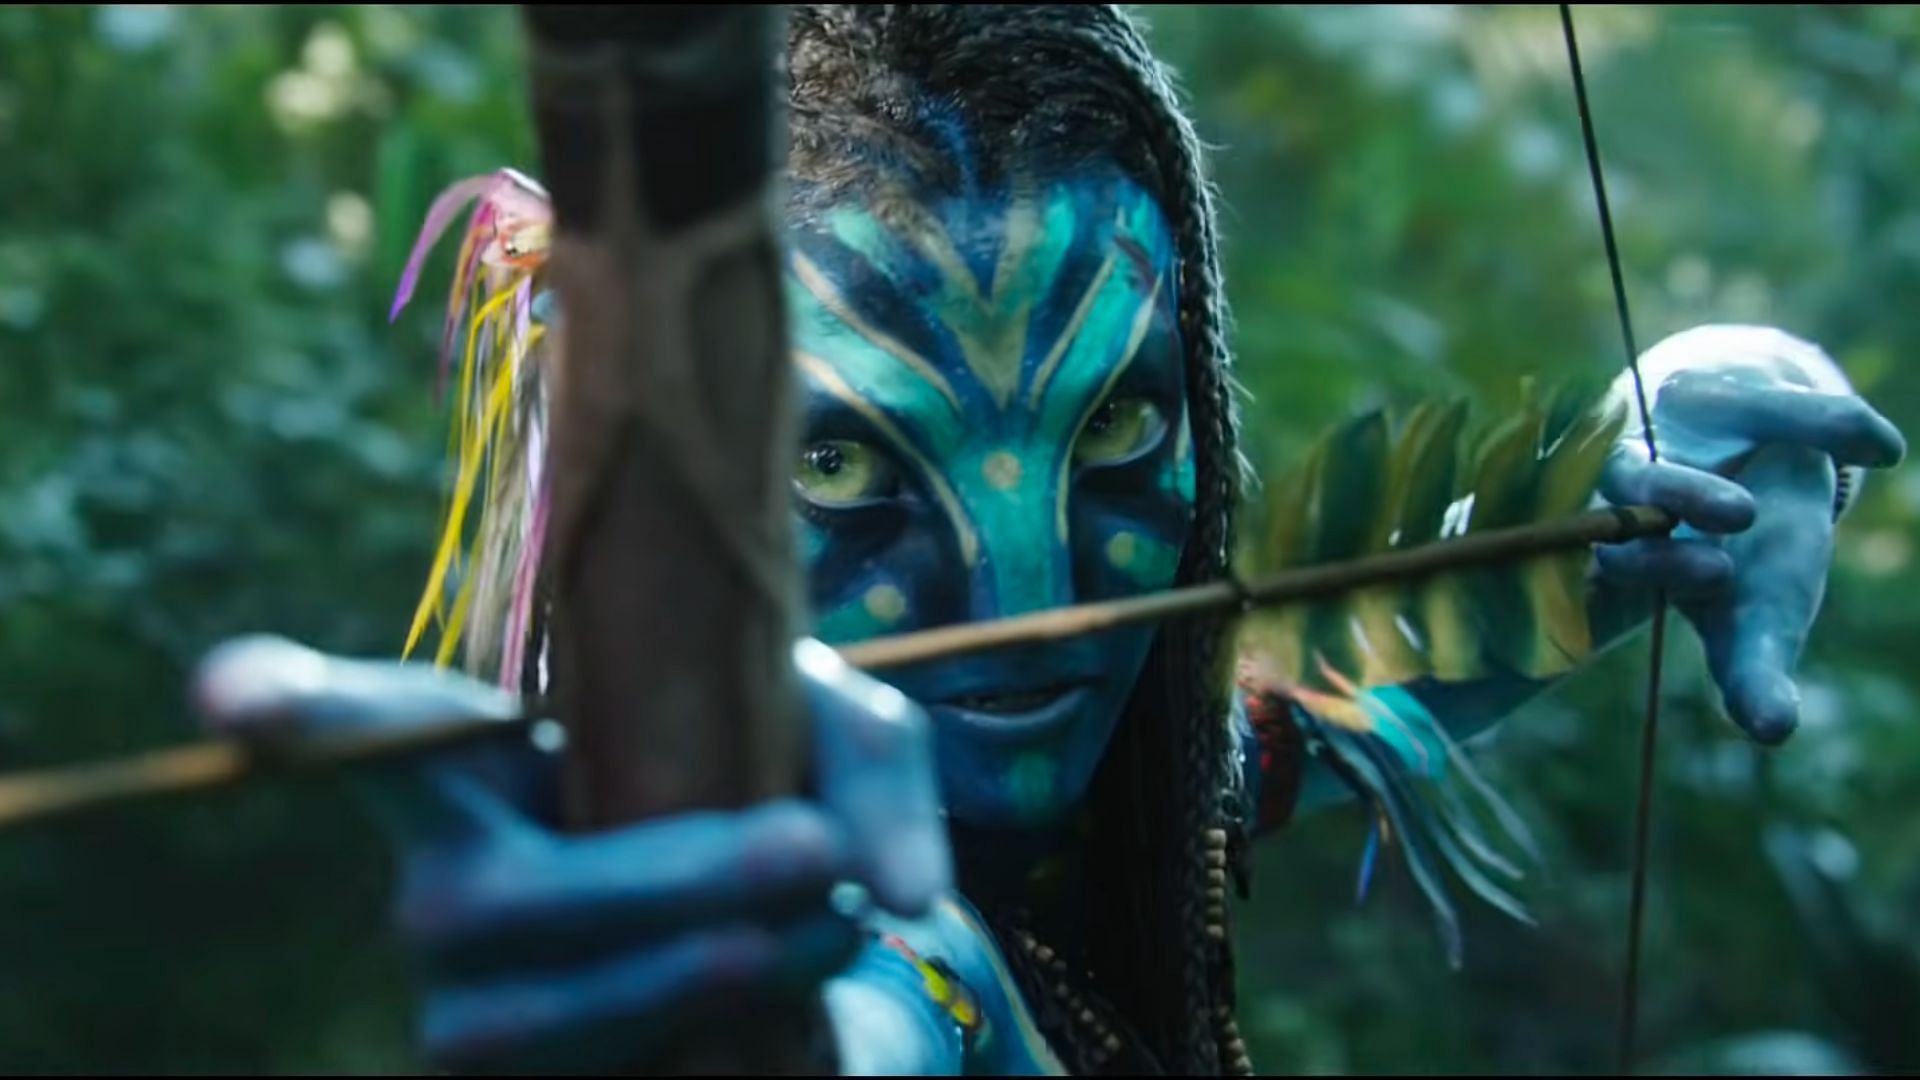 The film features several returning characters from the original Avatar movie (YouTube/Avatar)